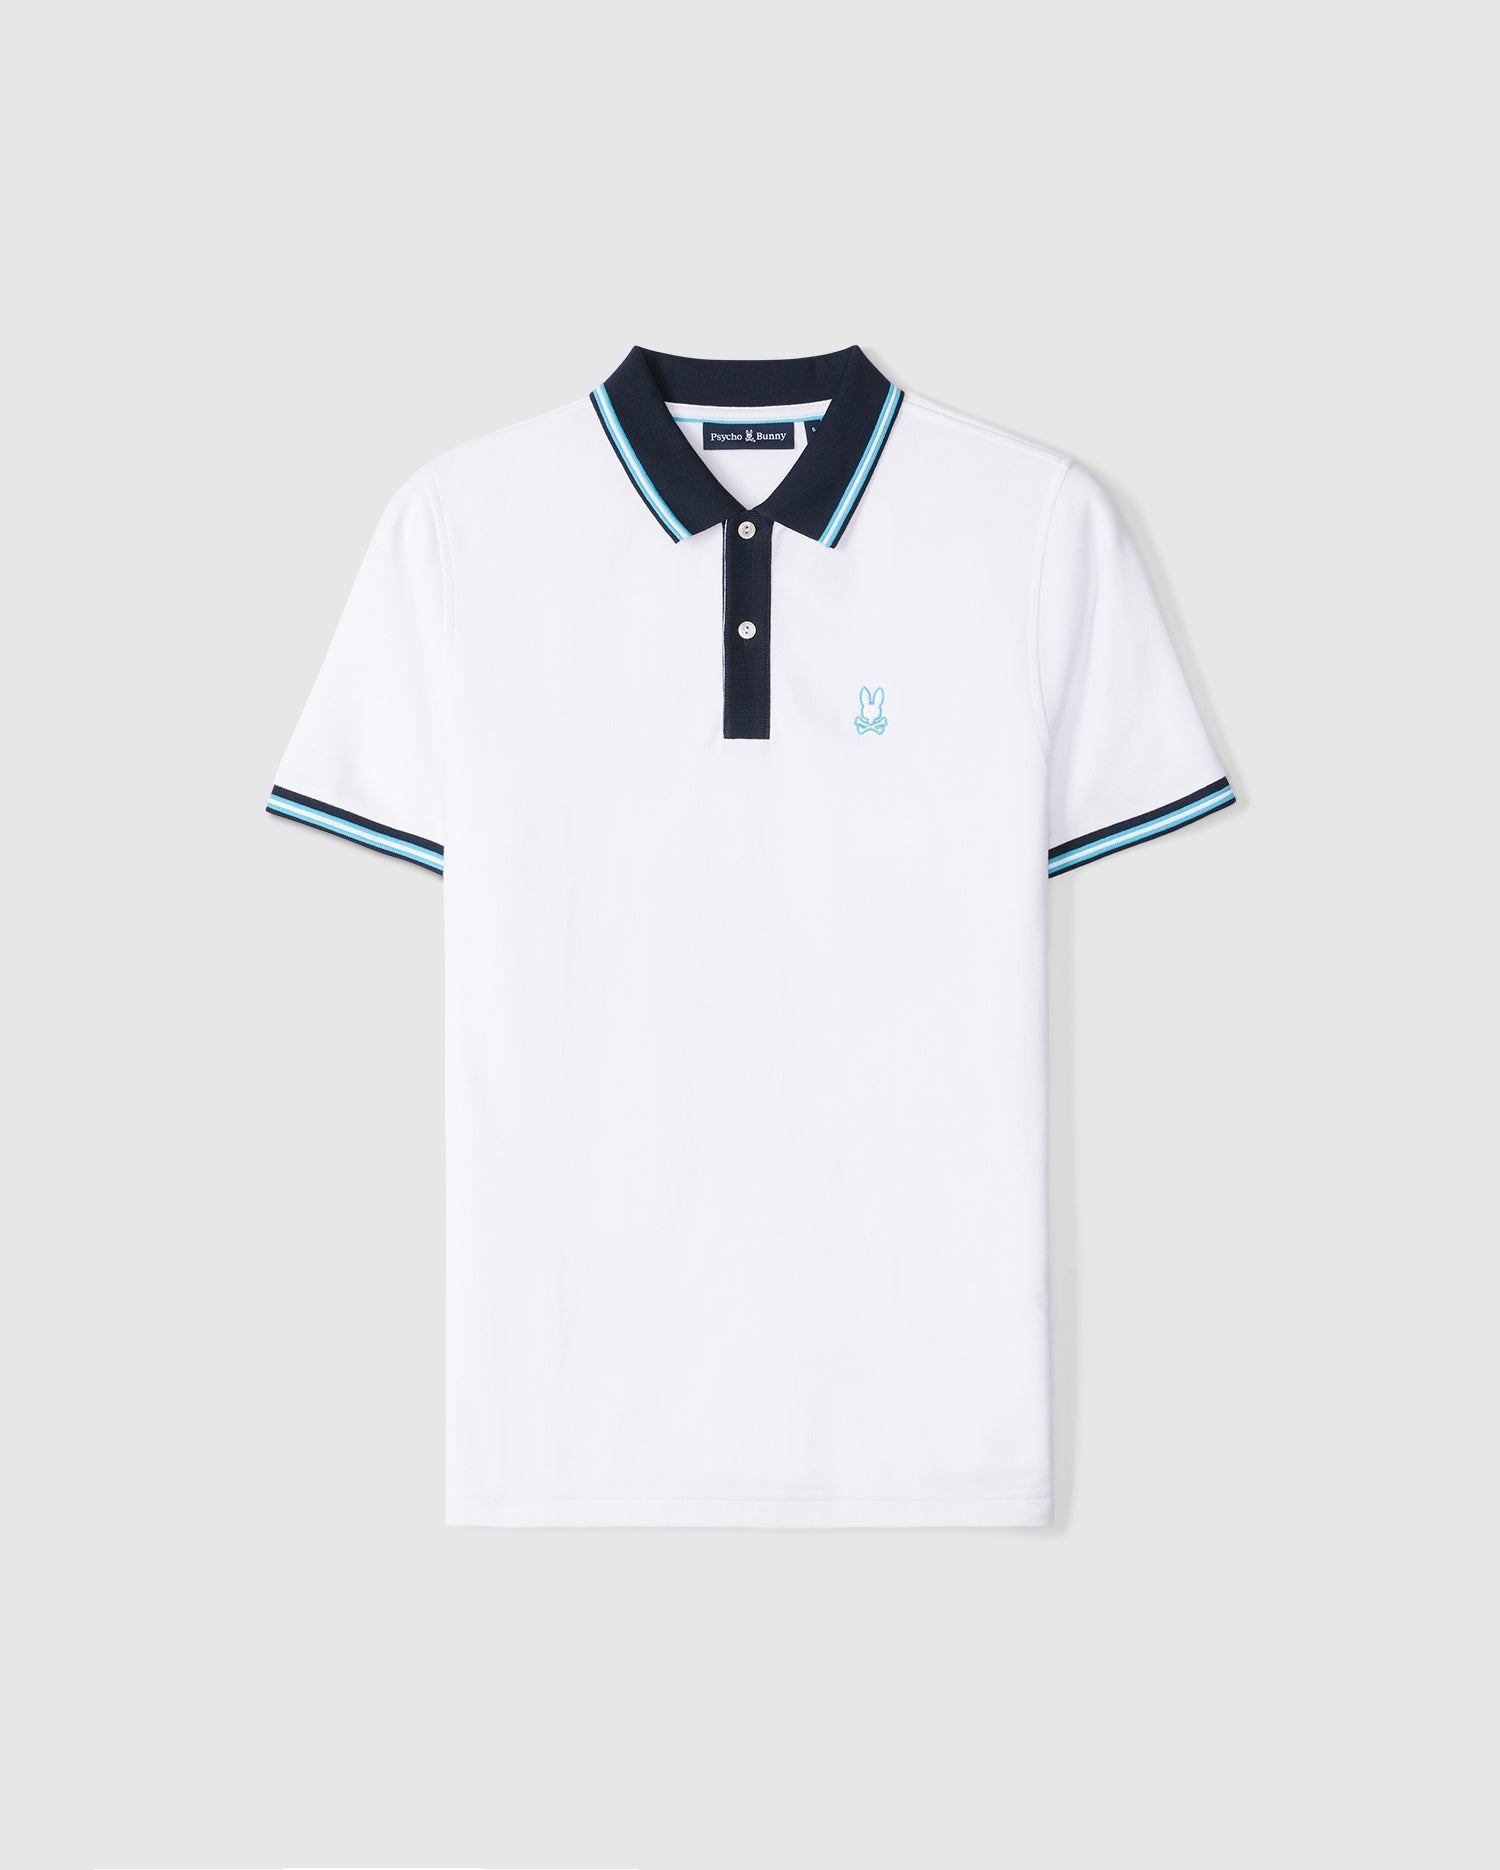 A standout polo shirt with a black contrast collar and black sleeve cuffs, both featuring light blue and white trim. This Pima cotton MENS SALINA PIQUE POLO SHIRT - B6K379B200 has a small embroidered blue bunny logo on the left chest and a three-button placket on the front. Brand: Psycho Bunny.